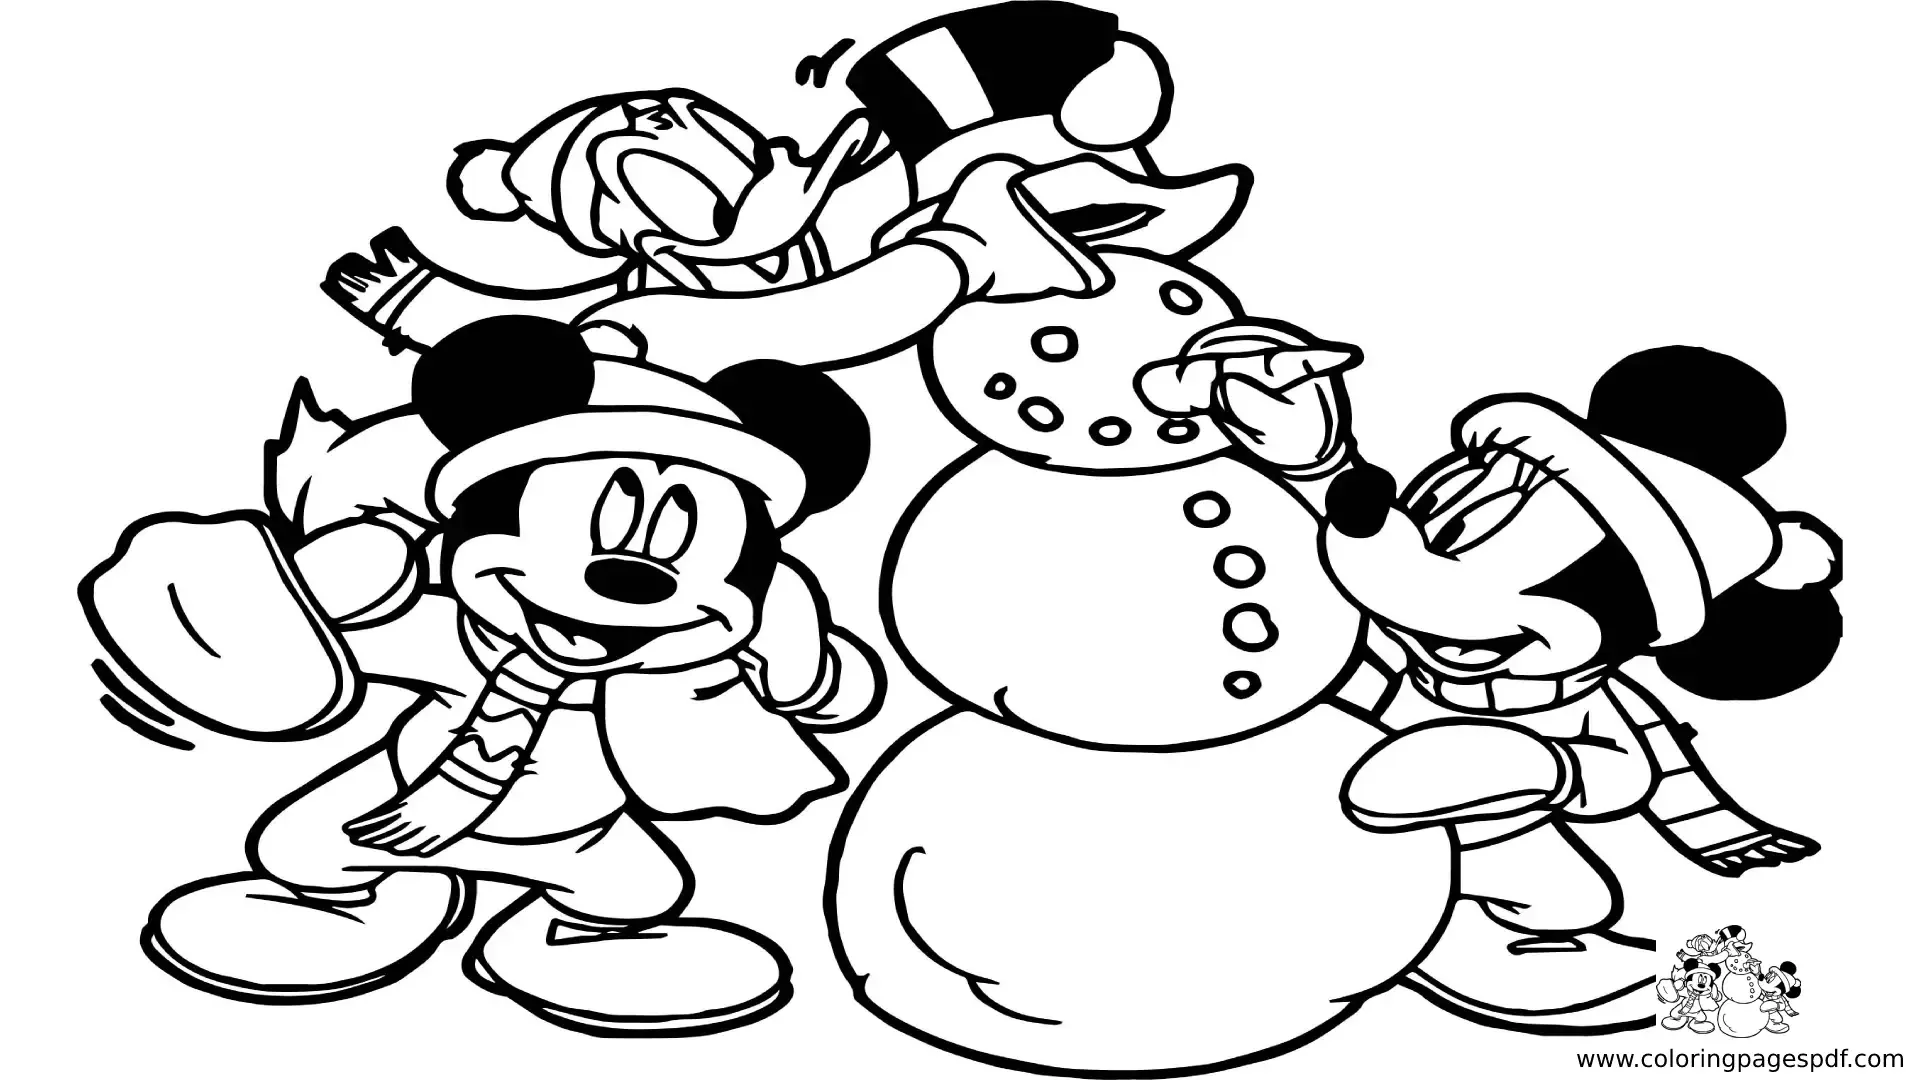 Coloring Pages Of Mickey Mouse And Friends Making Snowman